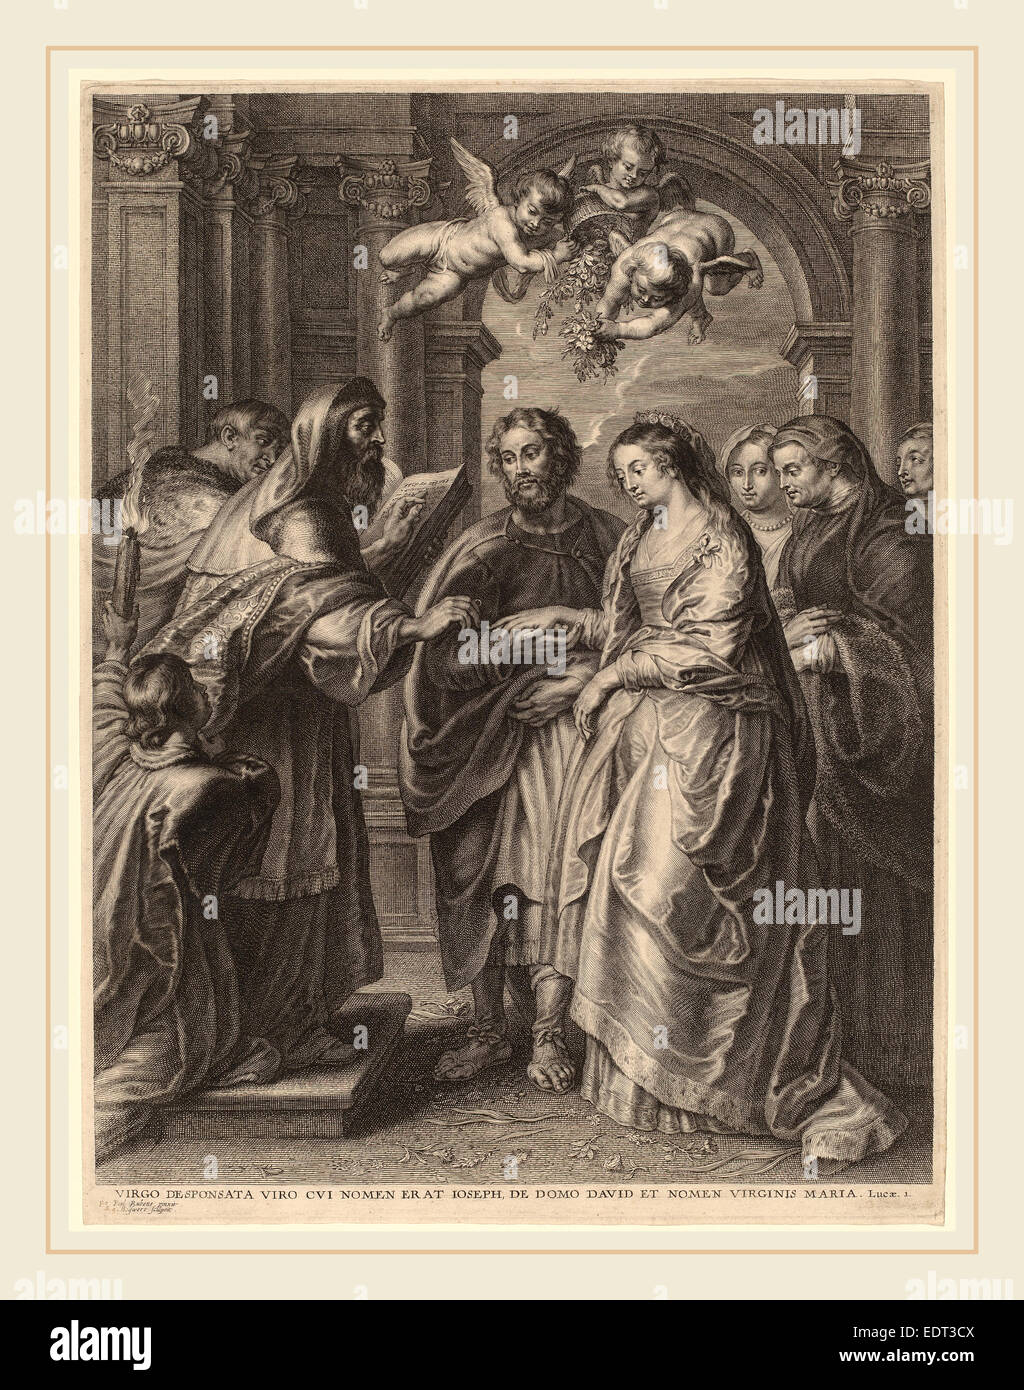 Schelte Adams Bolswert after Sir Peter Paul Rubens (Flemish, 1586-1659), The Marriage of the Virgin, engraving Stock Photo